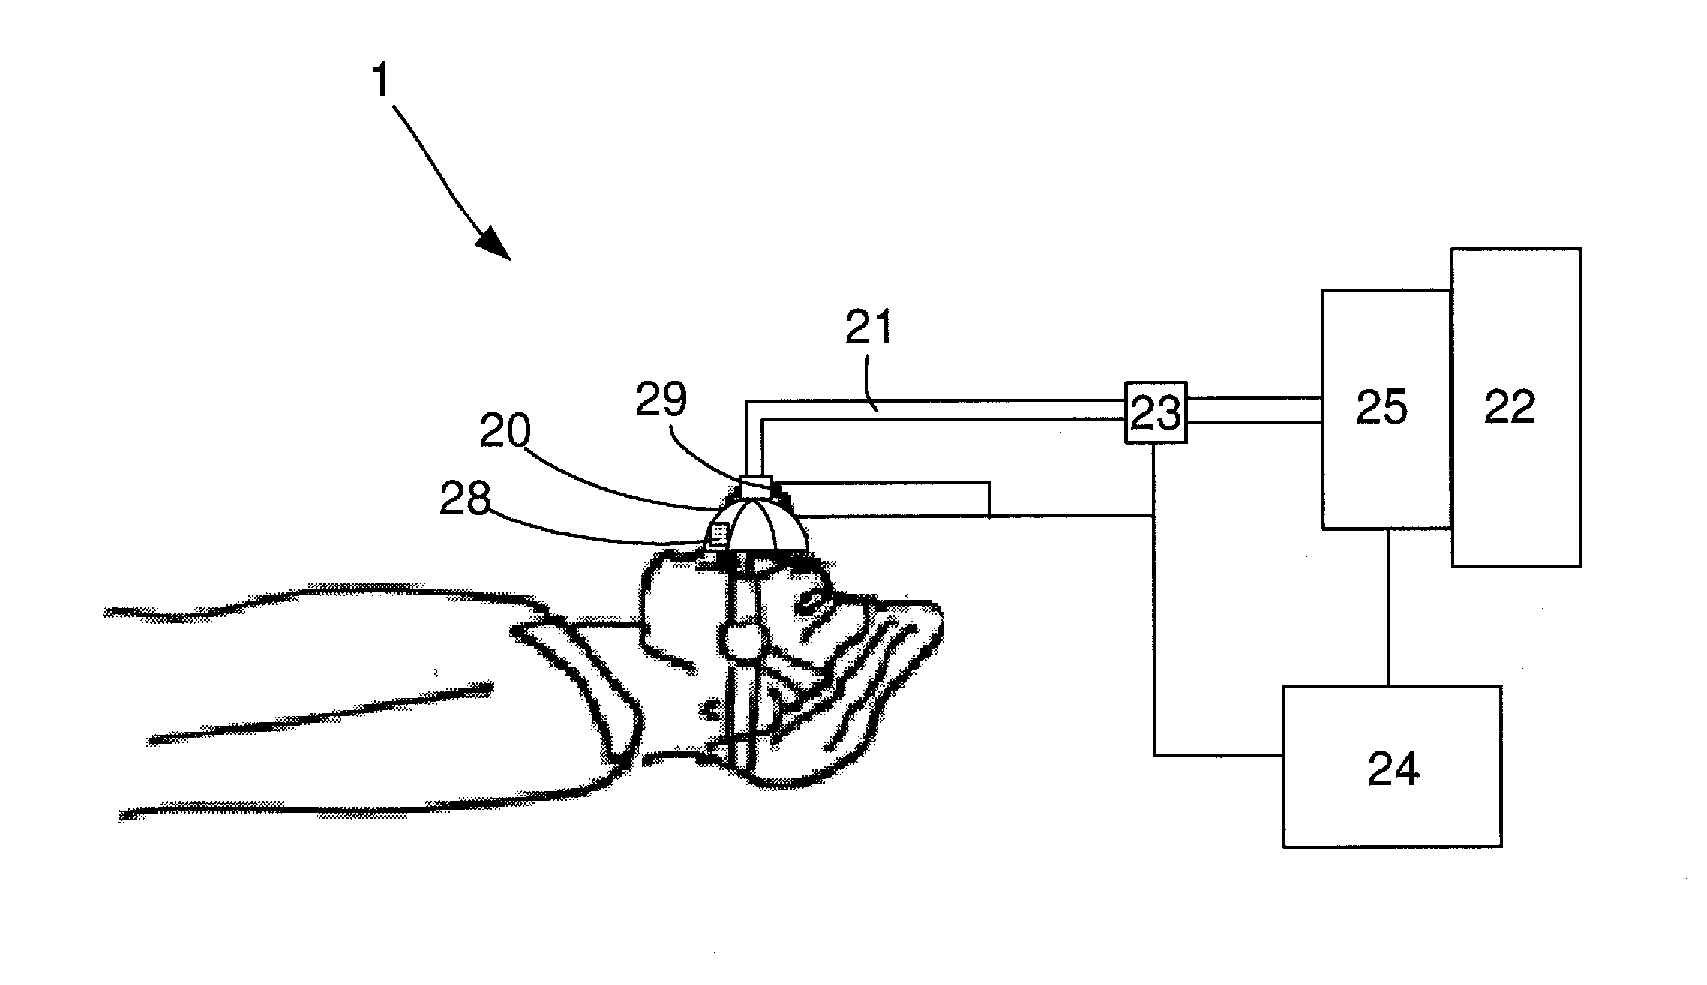 System and Method for Diagnosis and Treatment of Obstructive Sleep Apnea